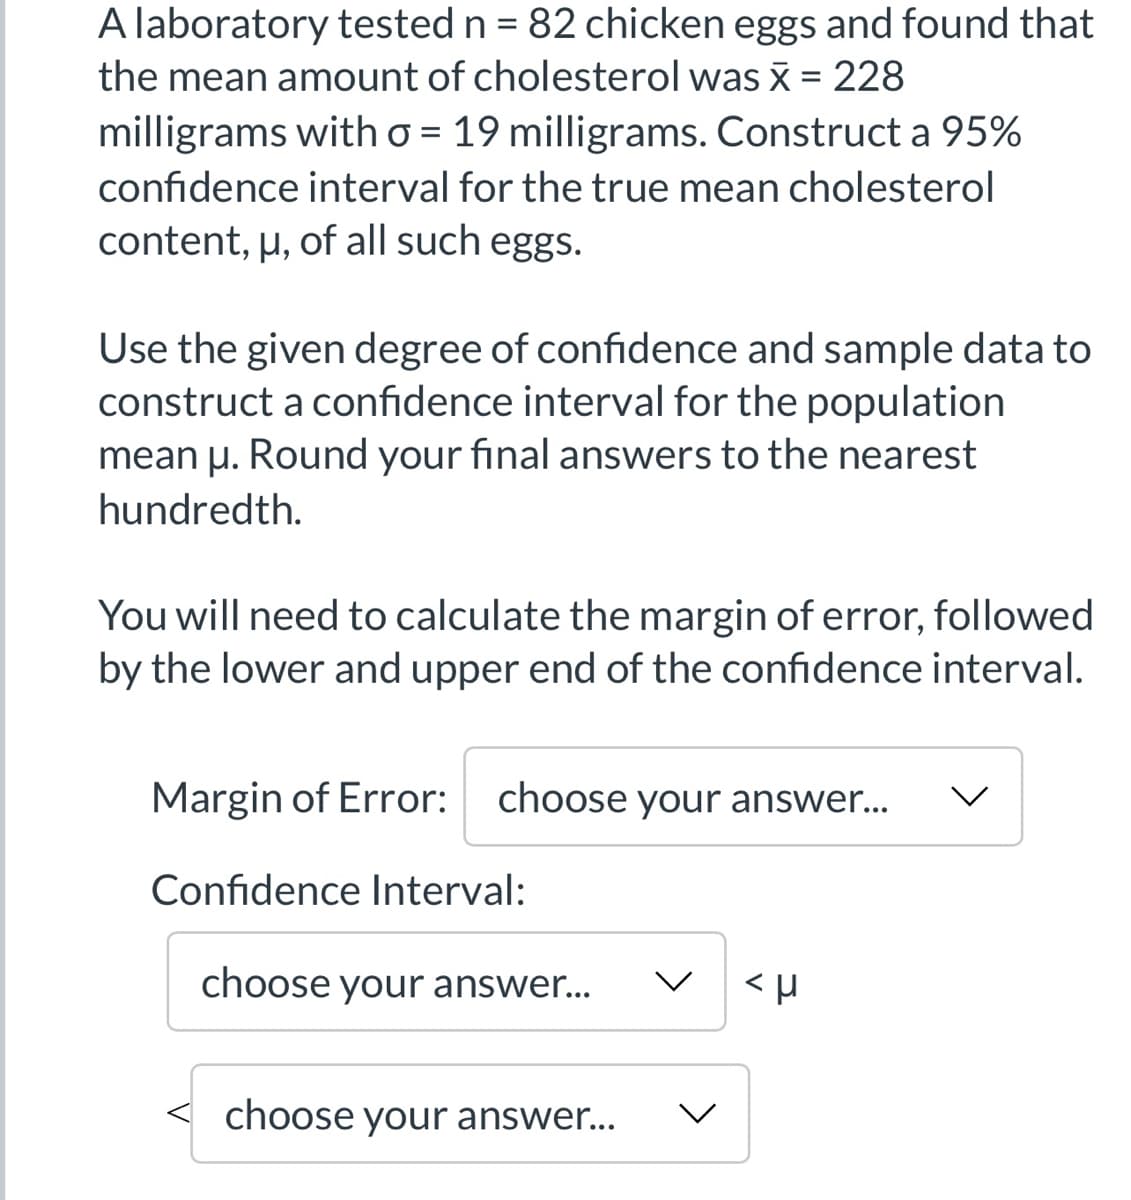 A laboratory tested n = 82 chicken eggs and found that
the mean amount of cholesterol was x = 228
milligrams with o = 19 milligrams. Construct a 95%
confidence interval for the true mean cholesterol
content, µ, of all such eggs.
Use the given degree of confidence and sample data to
construct a confidence interval for the population
mean u. Round your final answers to the nearest
hundredth.
You will need to calculate the margin of error, followed
by the lower and upper end of the confidence interval.
Margin of Error: choose your answer...
Confidence Interval:
choose your answer...
choose your answer...
